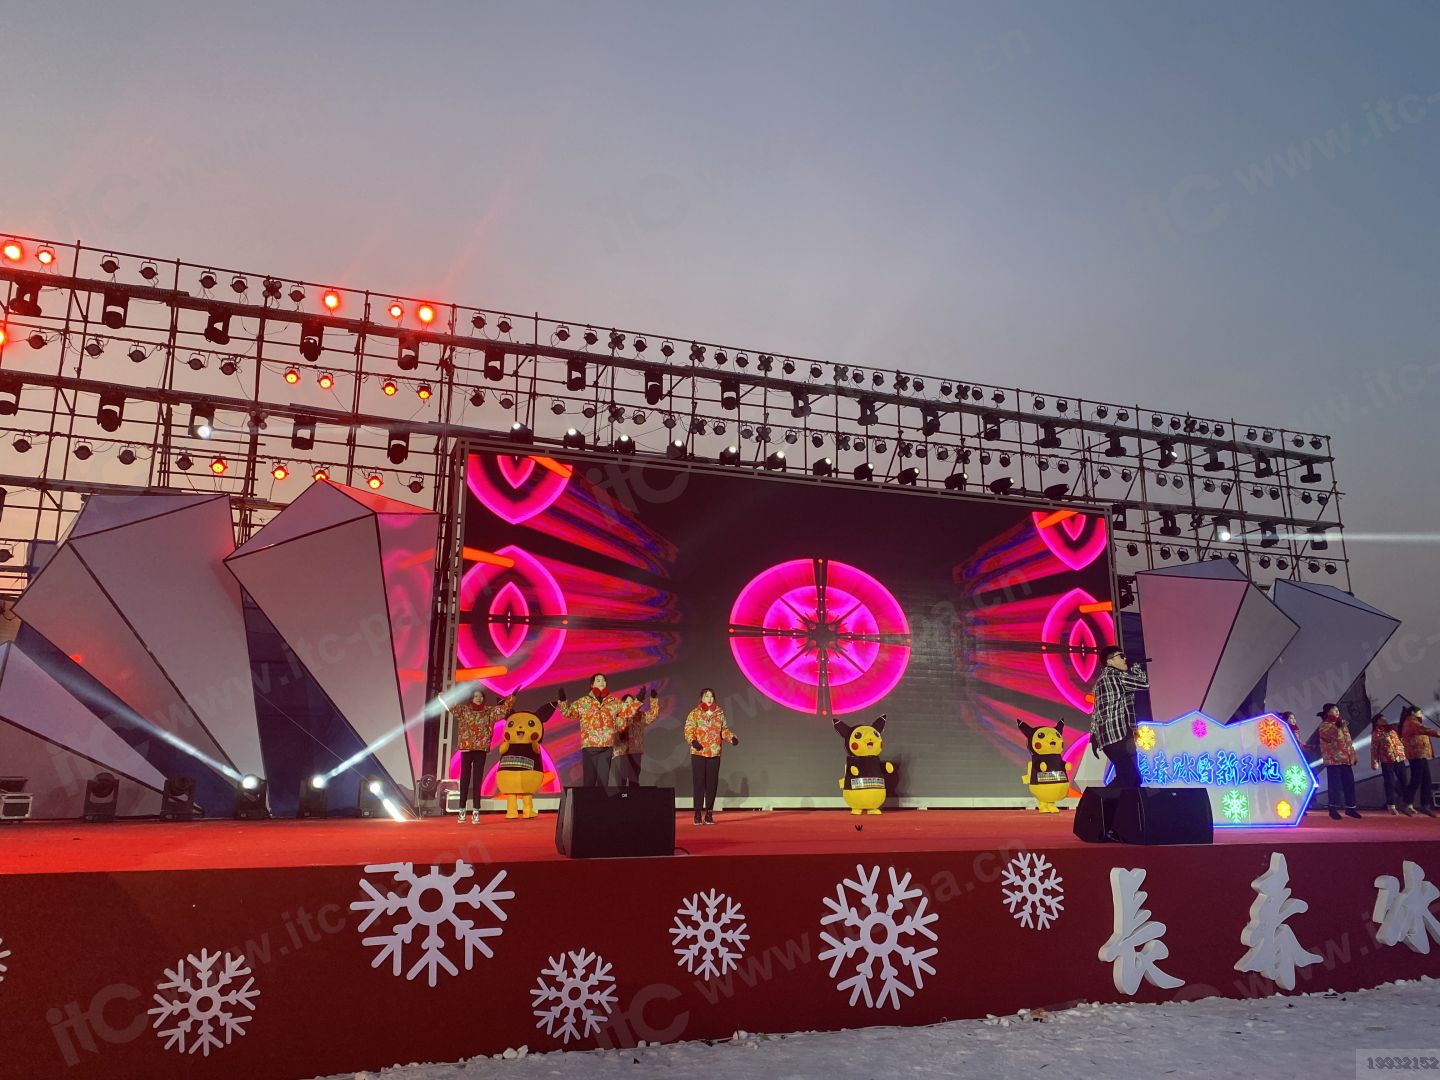 itc LED Screens& Linear Array Sound System Set Up in Changchun New World of Ice and Snow